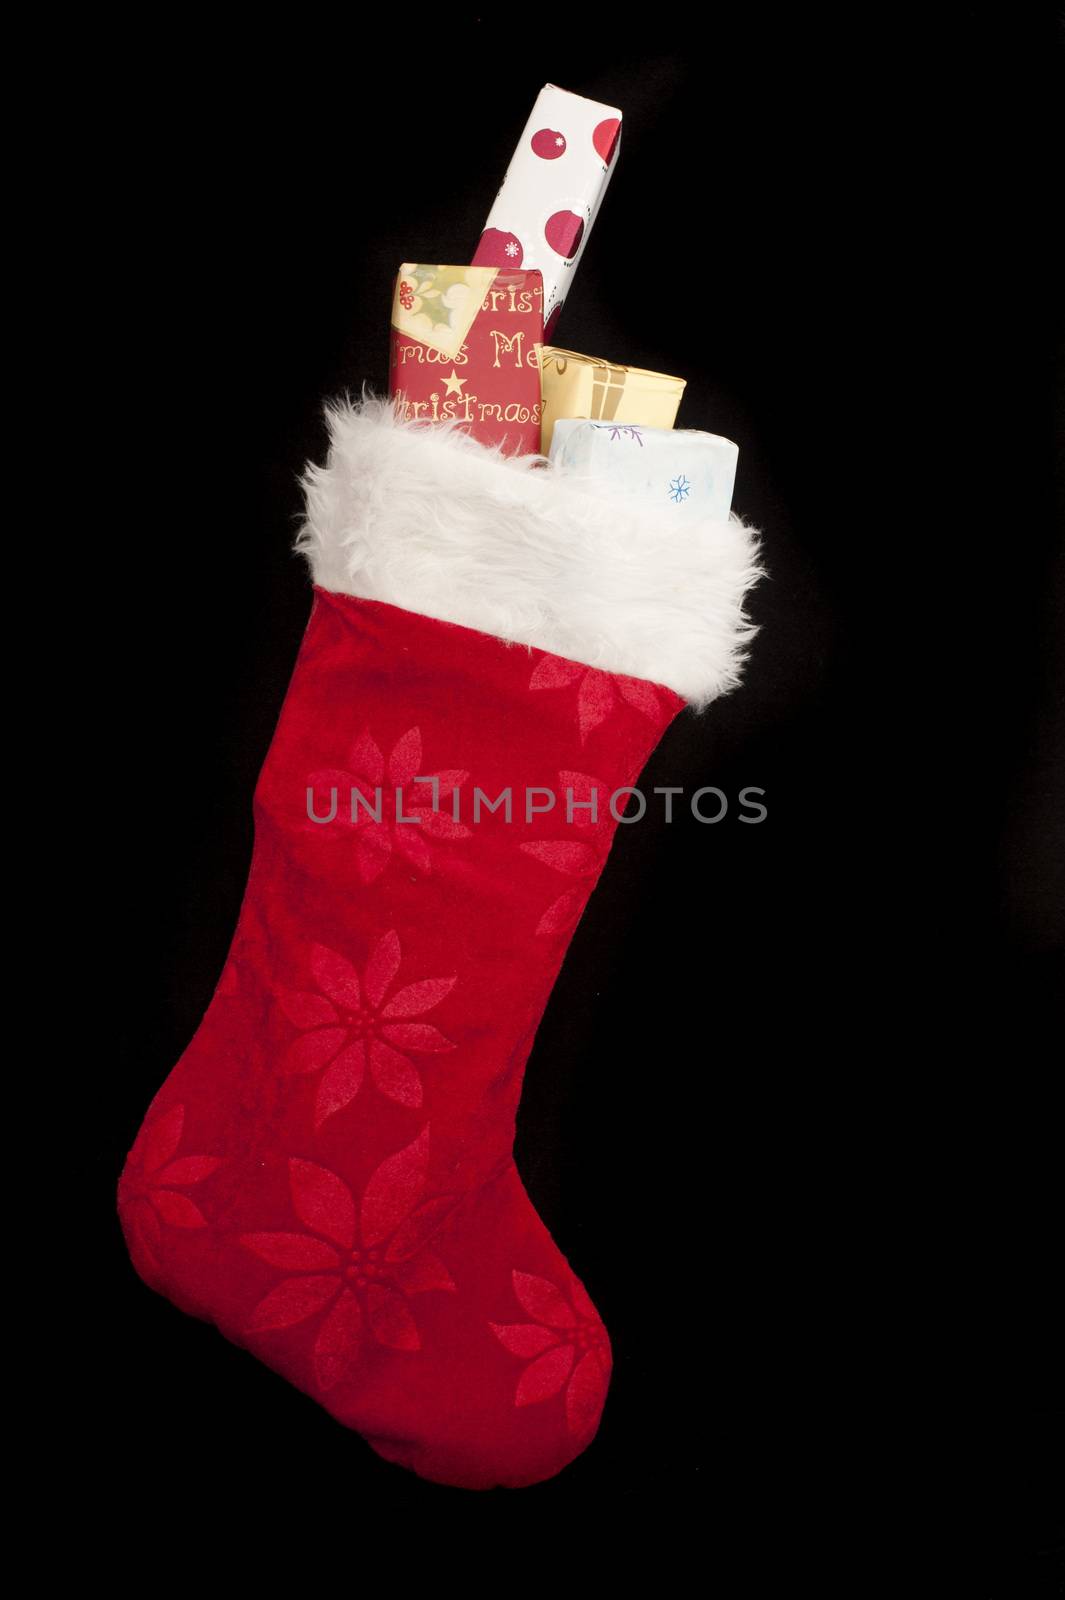 Colorful red Christmas stocking with decorative wrapped gifts peeking out the top over a black background with copy space